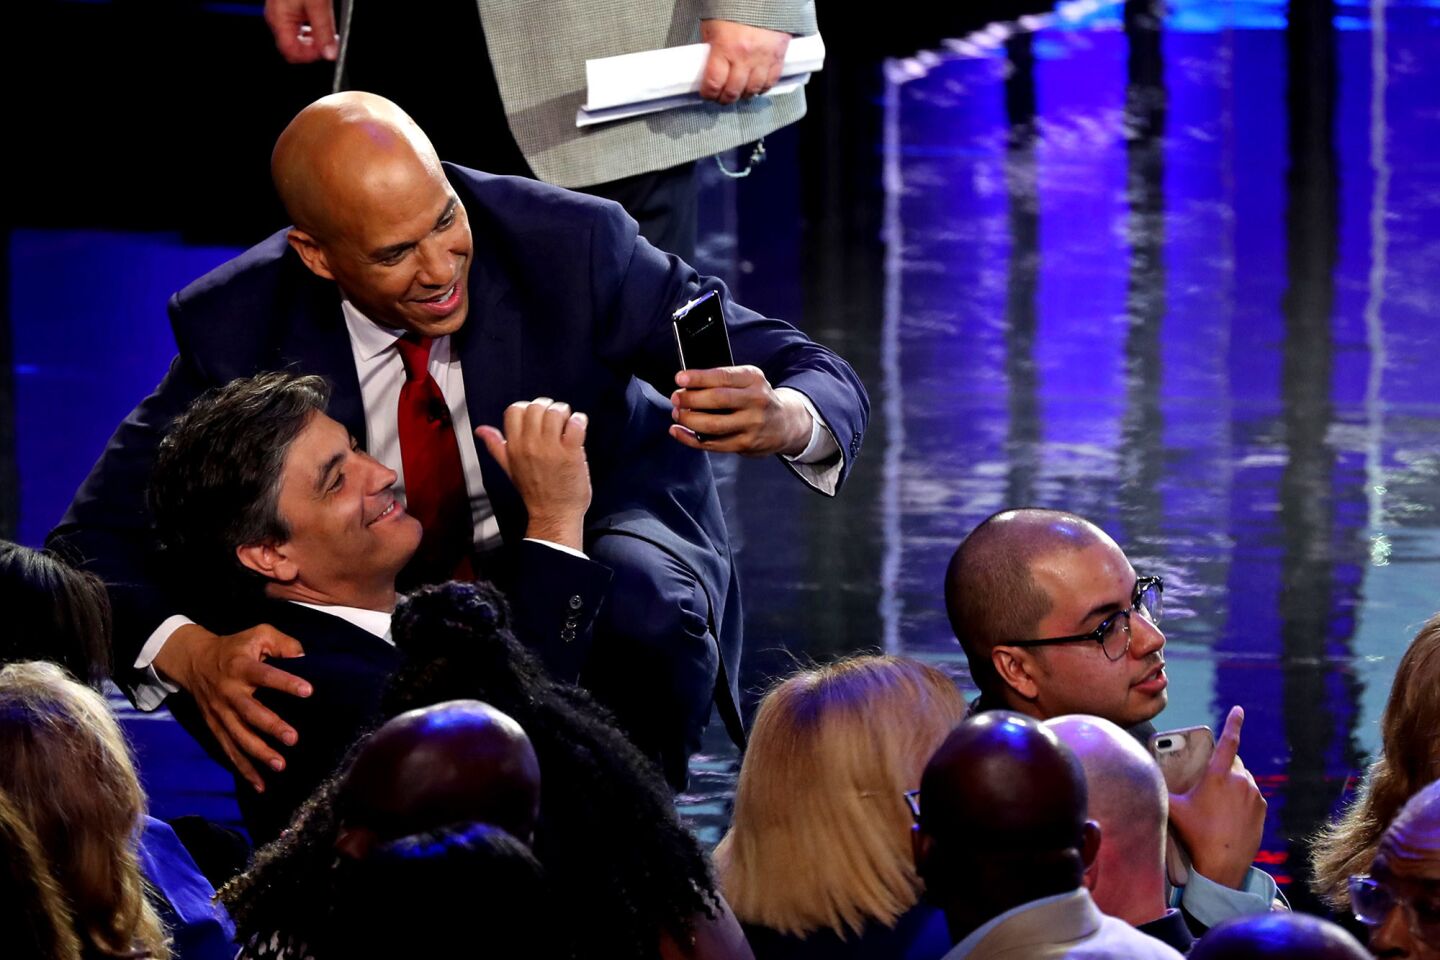 Sen. Cory Booker (D-NJ) greets a member of the audience after the first night of the Democratic presidential debate on June 26, 2019 in Miami, Florida. A field of 20 Democratic presidential candidates was split into two groups of 10 for the first debate of the 2020 election, taking place over two nights at Knight Concert Hall of the Adrienne Arsht Center for the Performing Arts of Miami-Dade County, hosted by NBC News, MSNBC, and Telemundo.